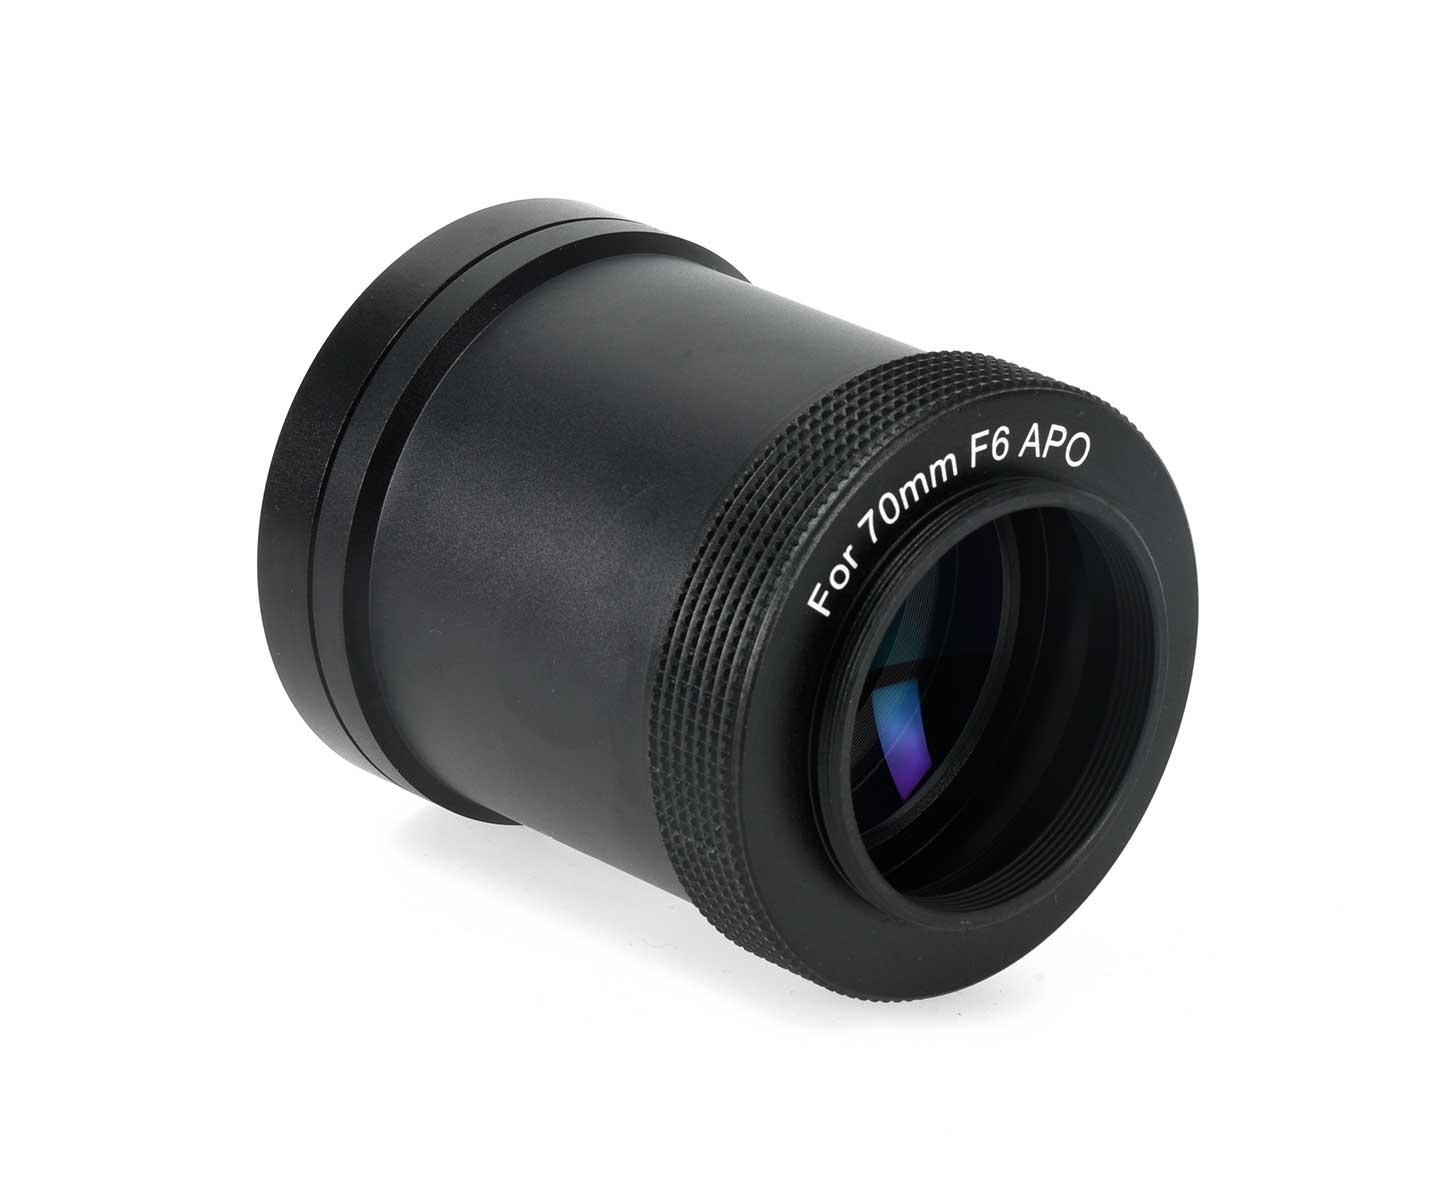  The corrector and focal reducer is designed for the TSCFAPO70 and allows astrophotography through this telescope. [EN] 